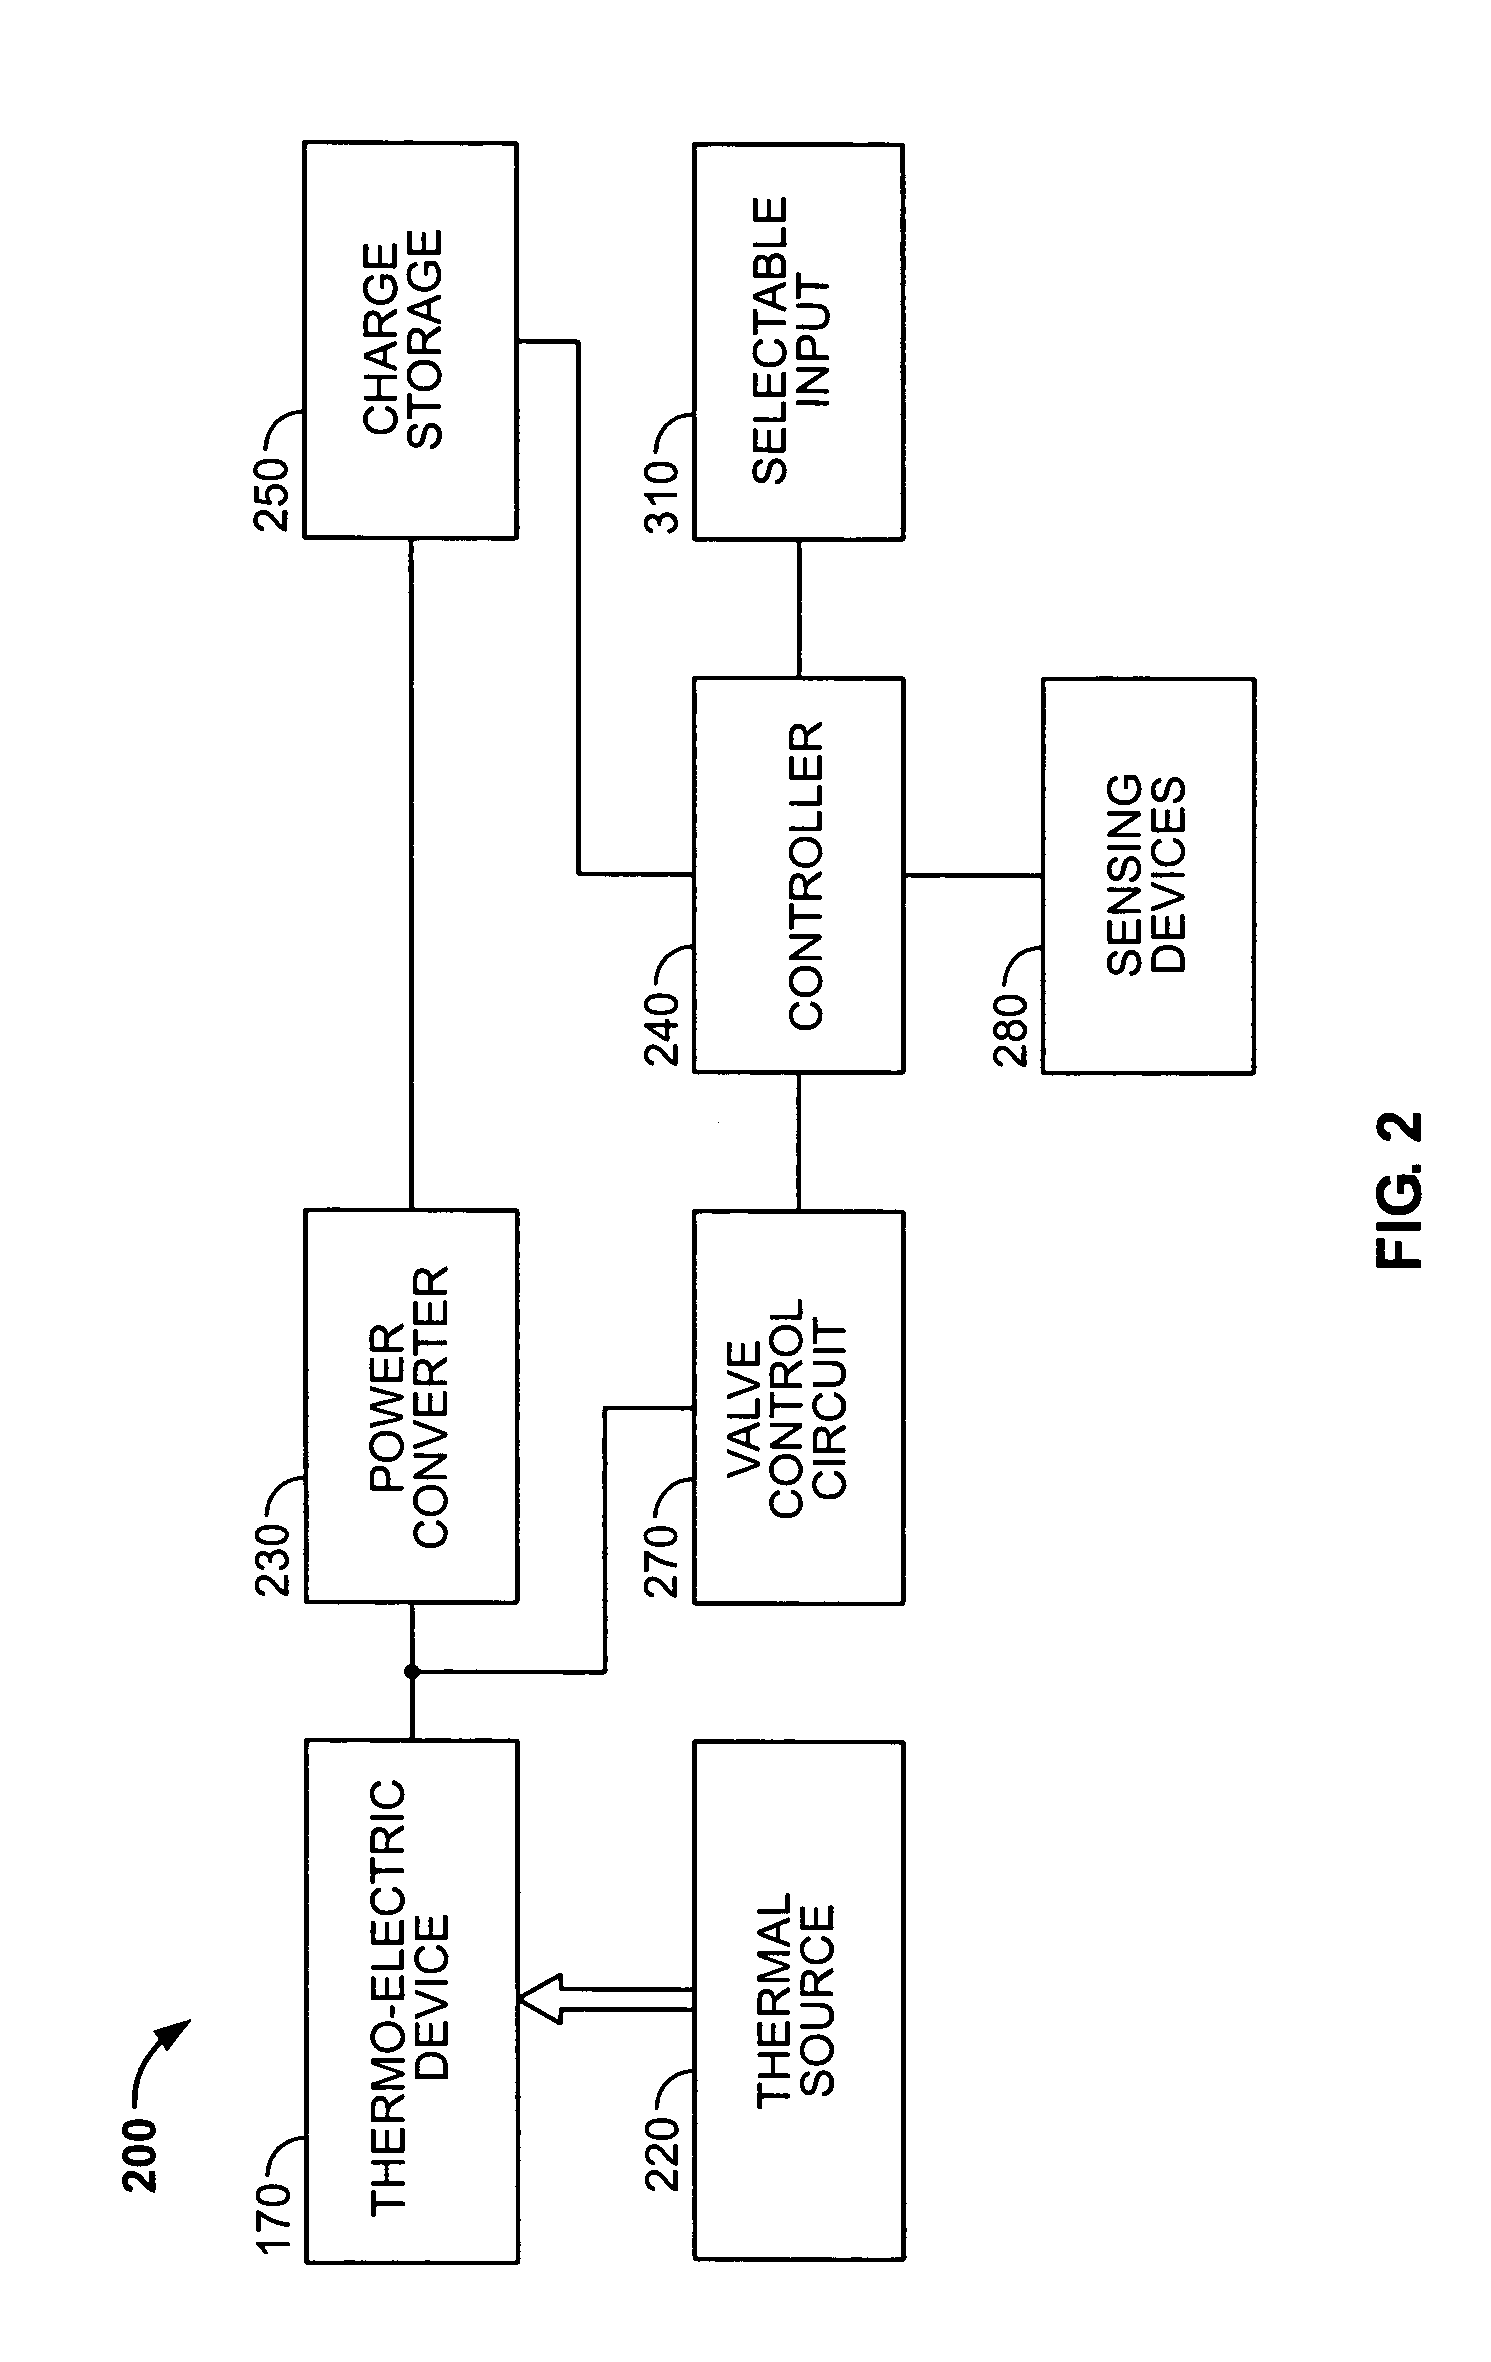 Method and system for combined standing pilot safety and temperature setting